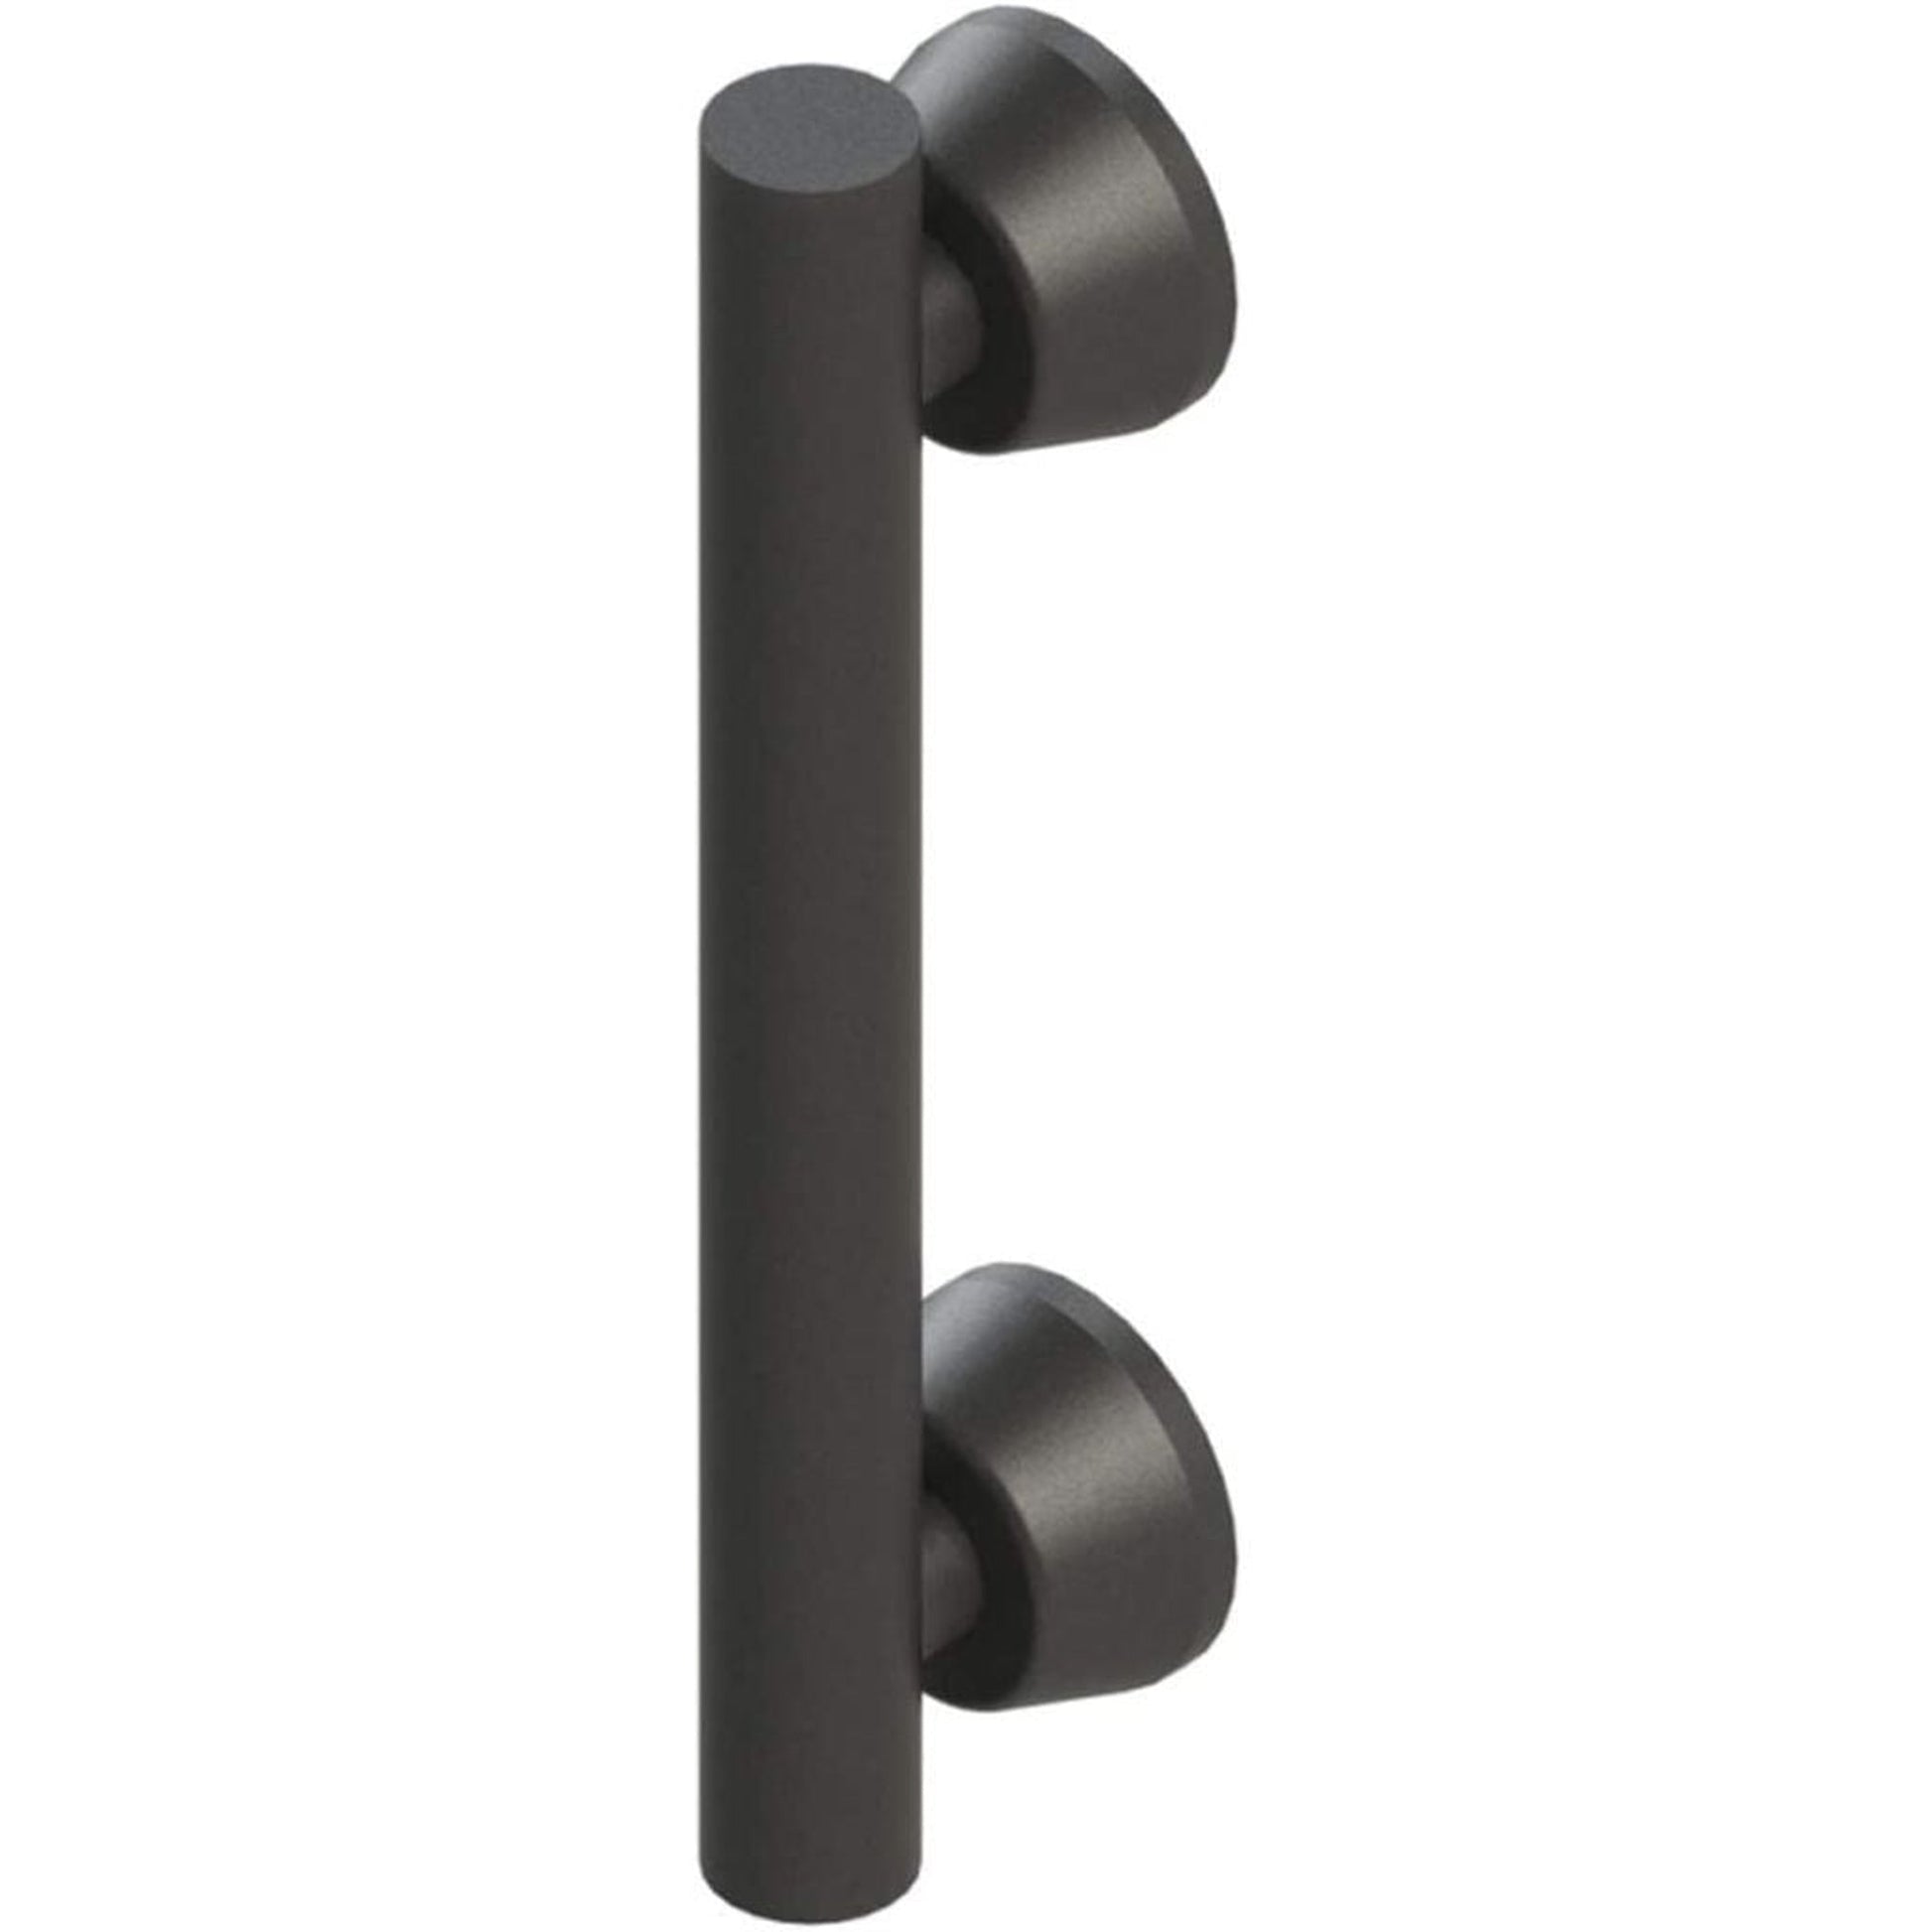 Invisia 12" Matte Black Wall-Mounted Linear Bar With Integrated Grab Bar